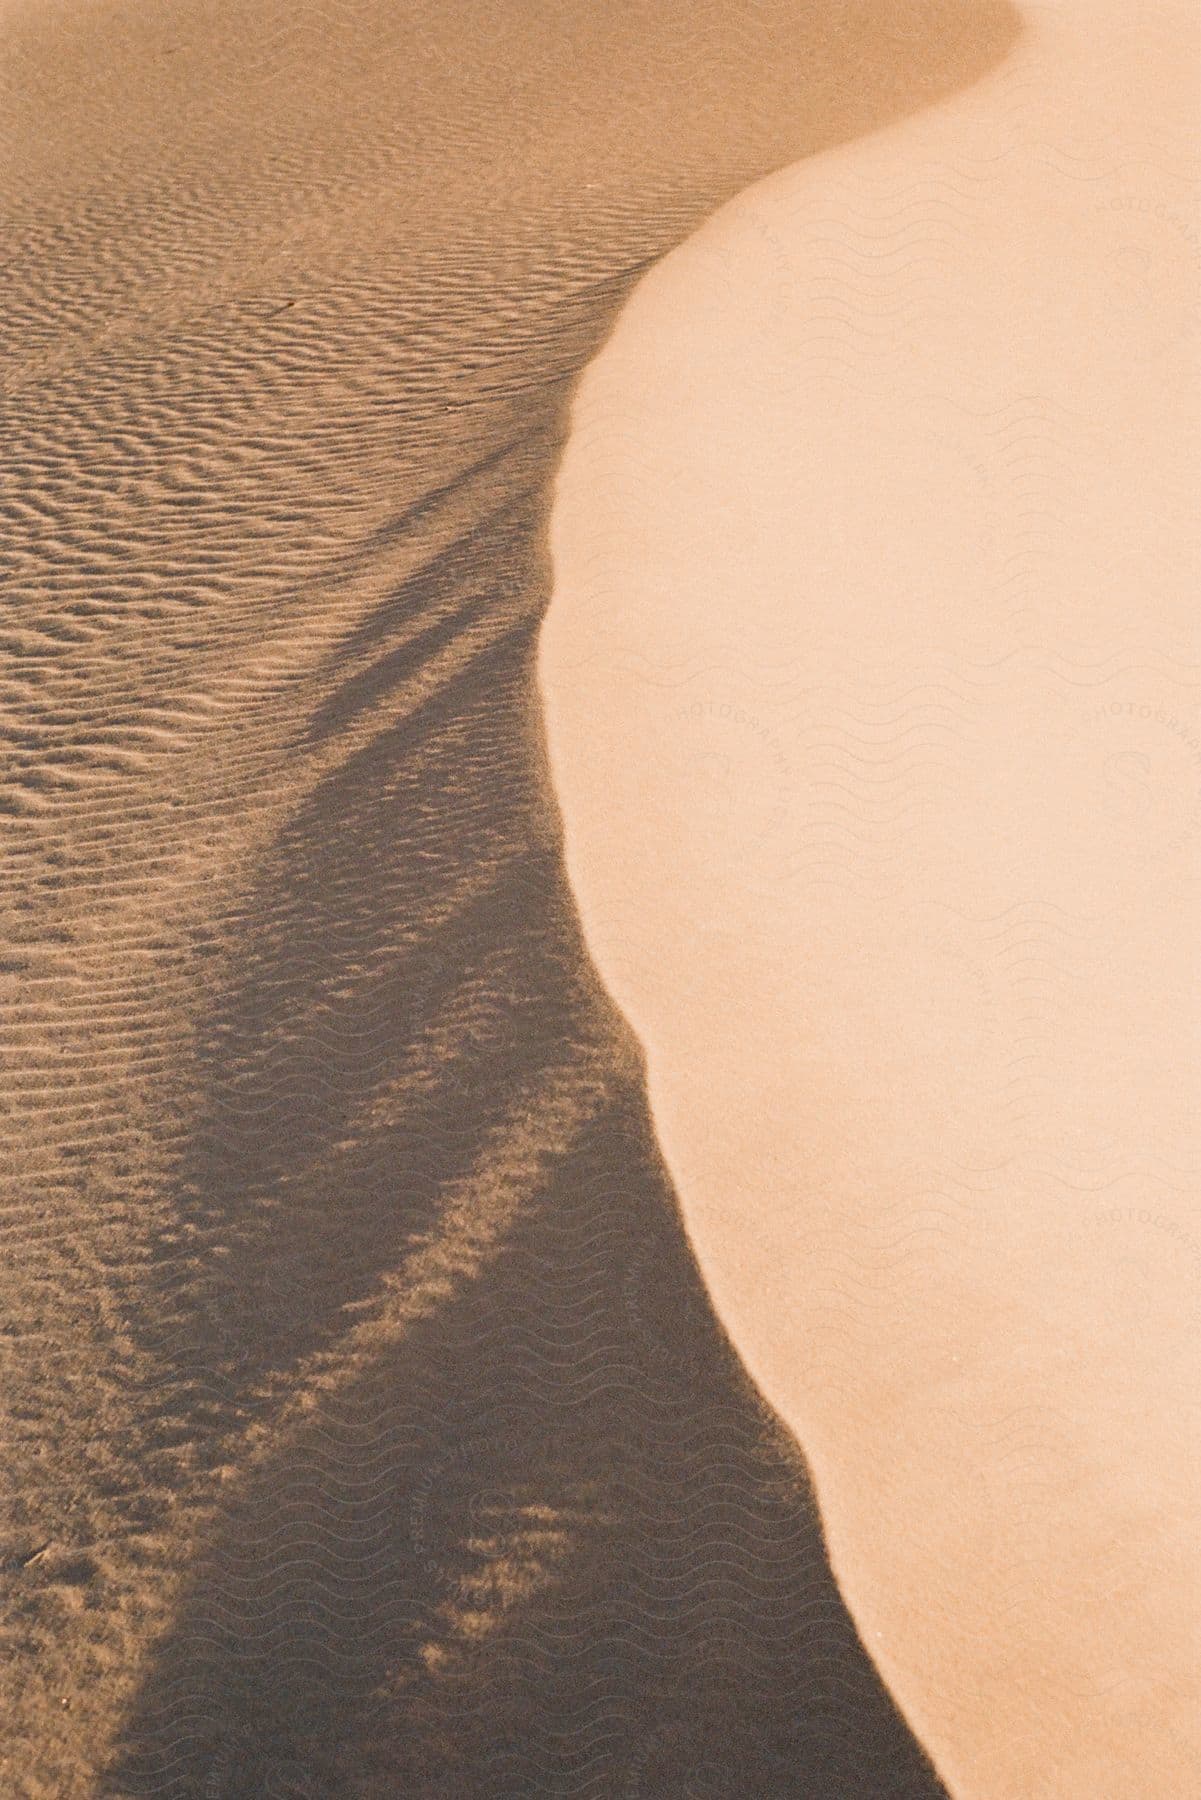 a wave pattern forms in the sand below a dune